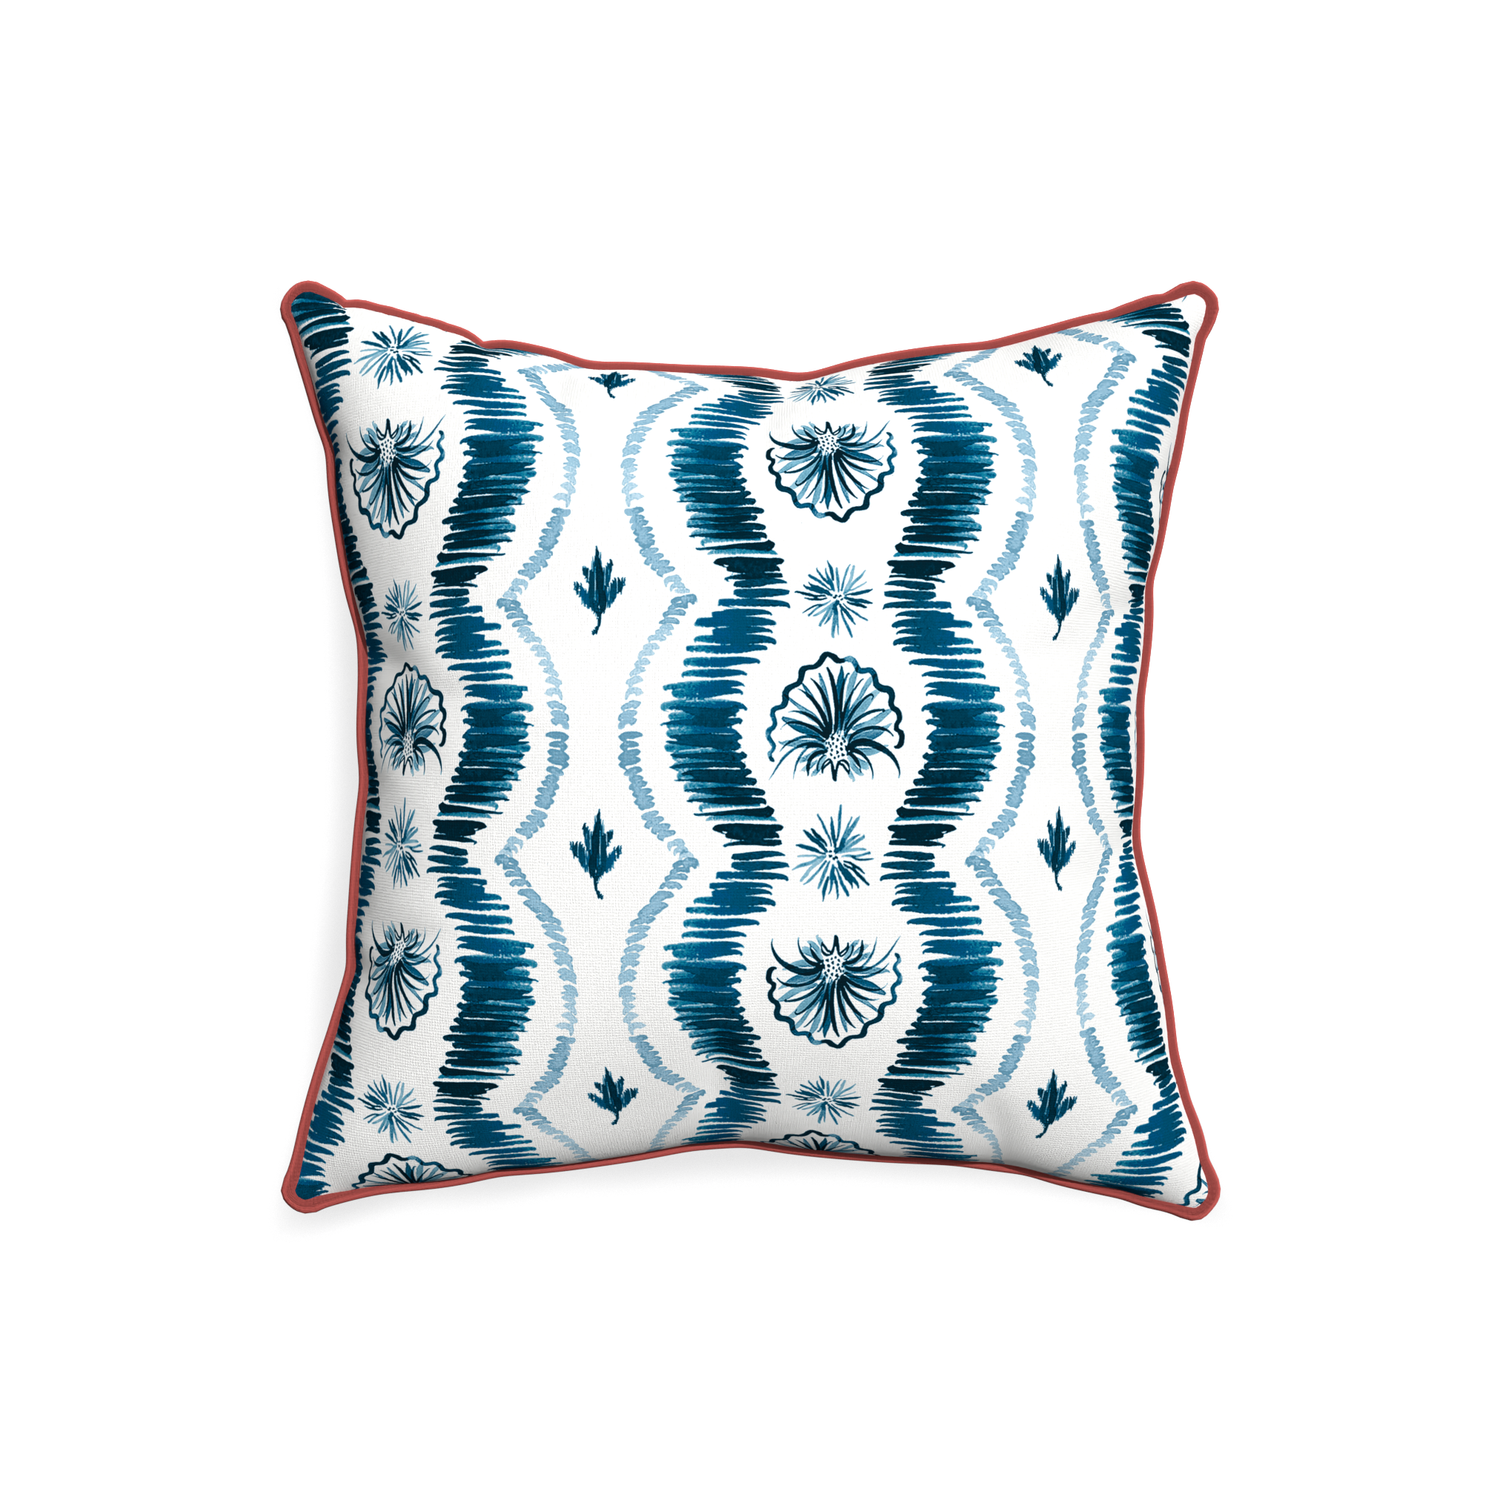 20-square alice custom blue ikatpillow with c piping on white background